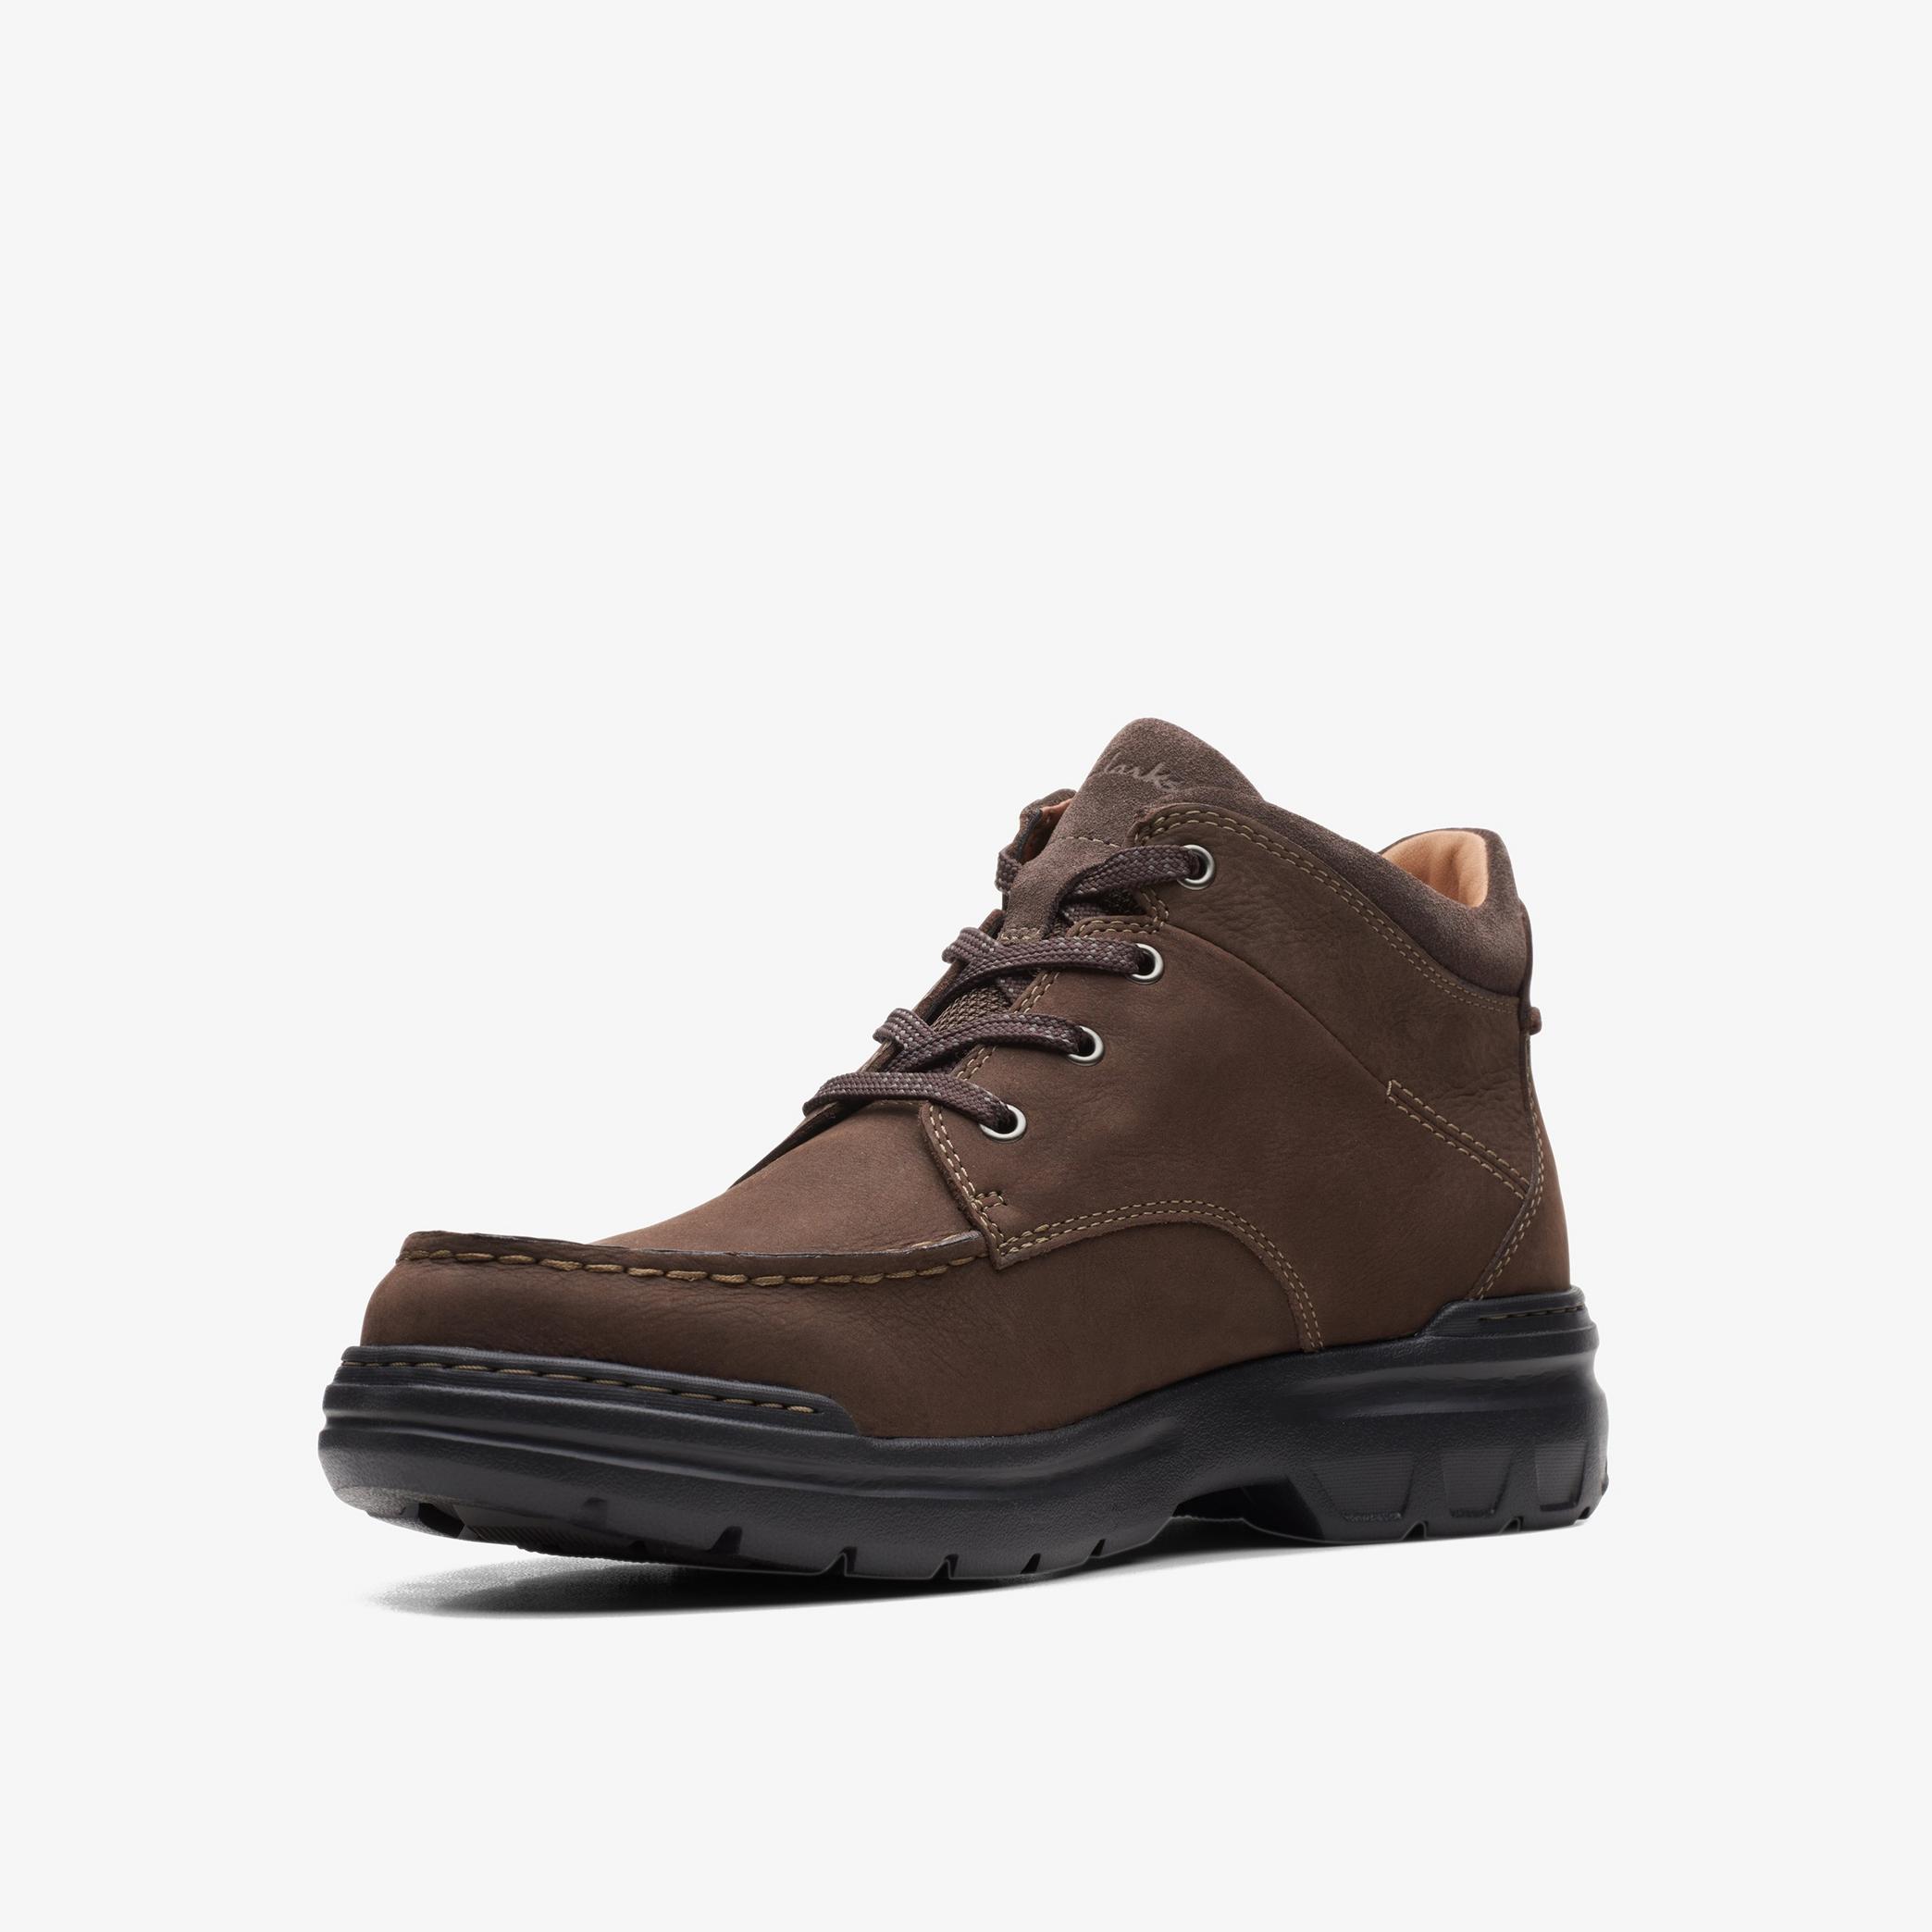 Rockie2 Hi GTX Brown Nubuck Ankle Boots, view 4 of 6